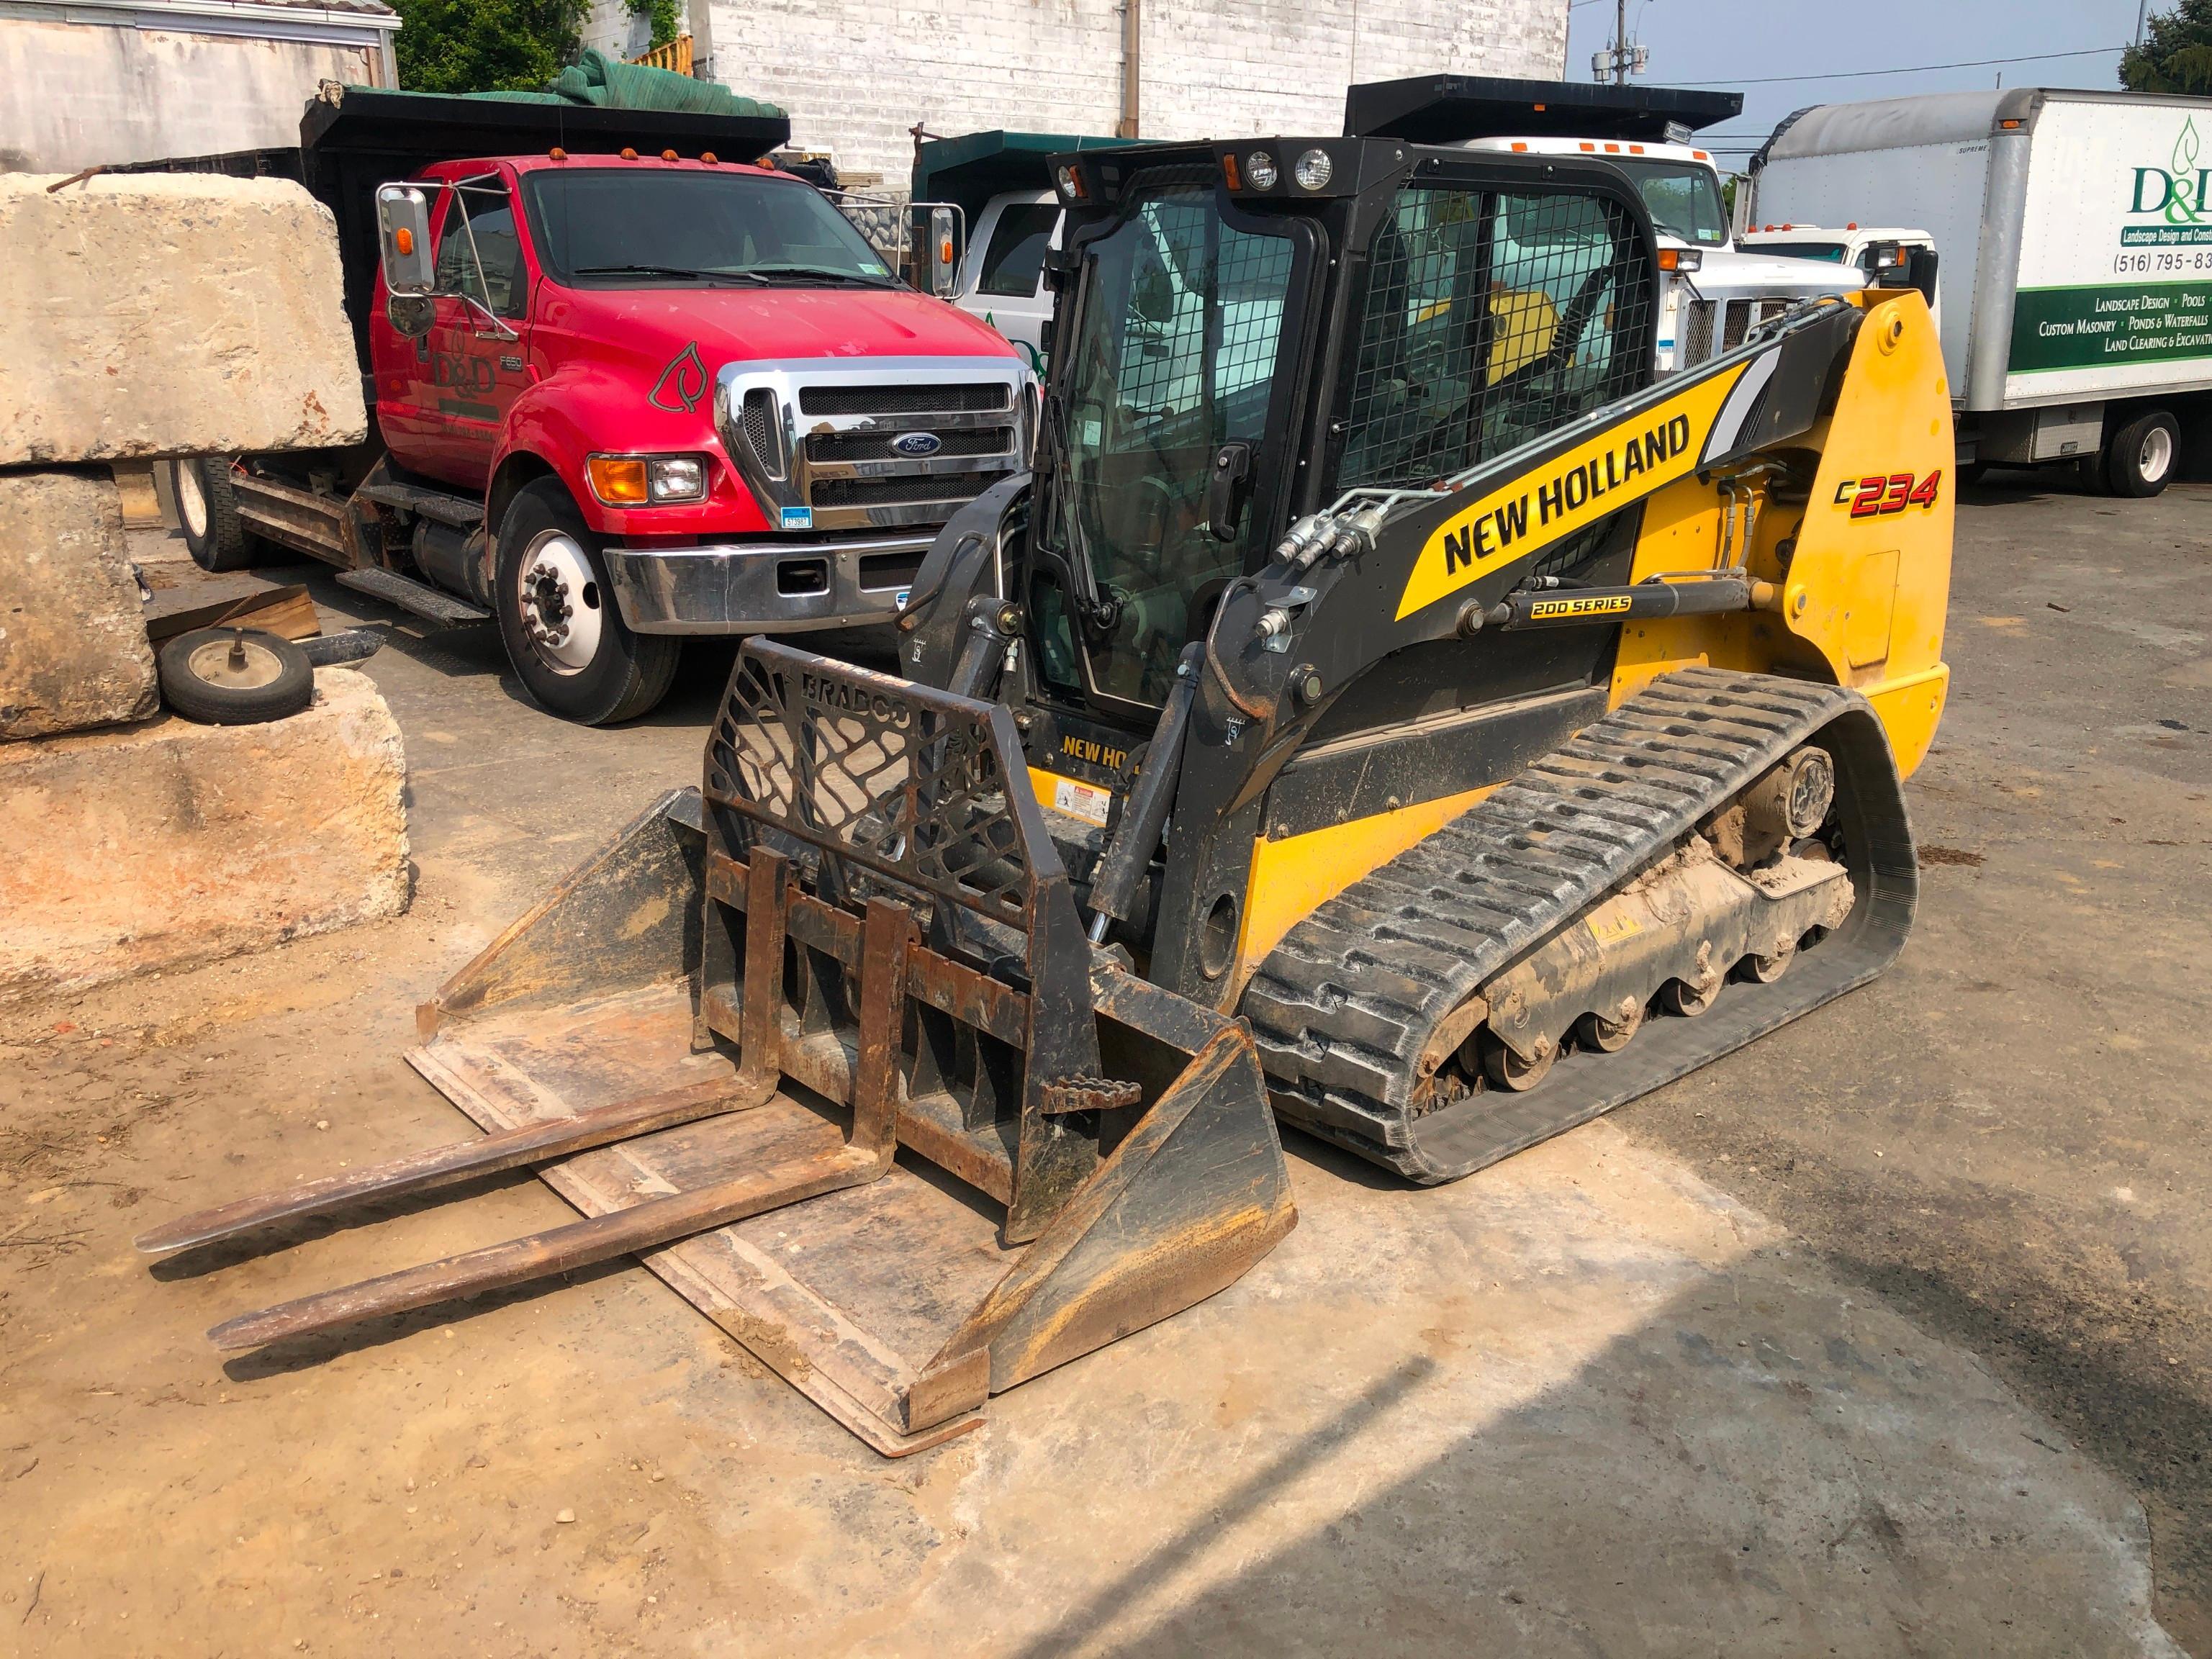 2018 NEW HOLLAND C234 RUBBER TRACKED SKID STEER